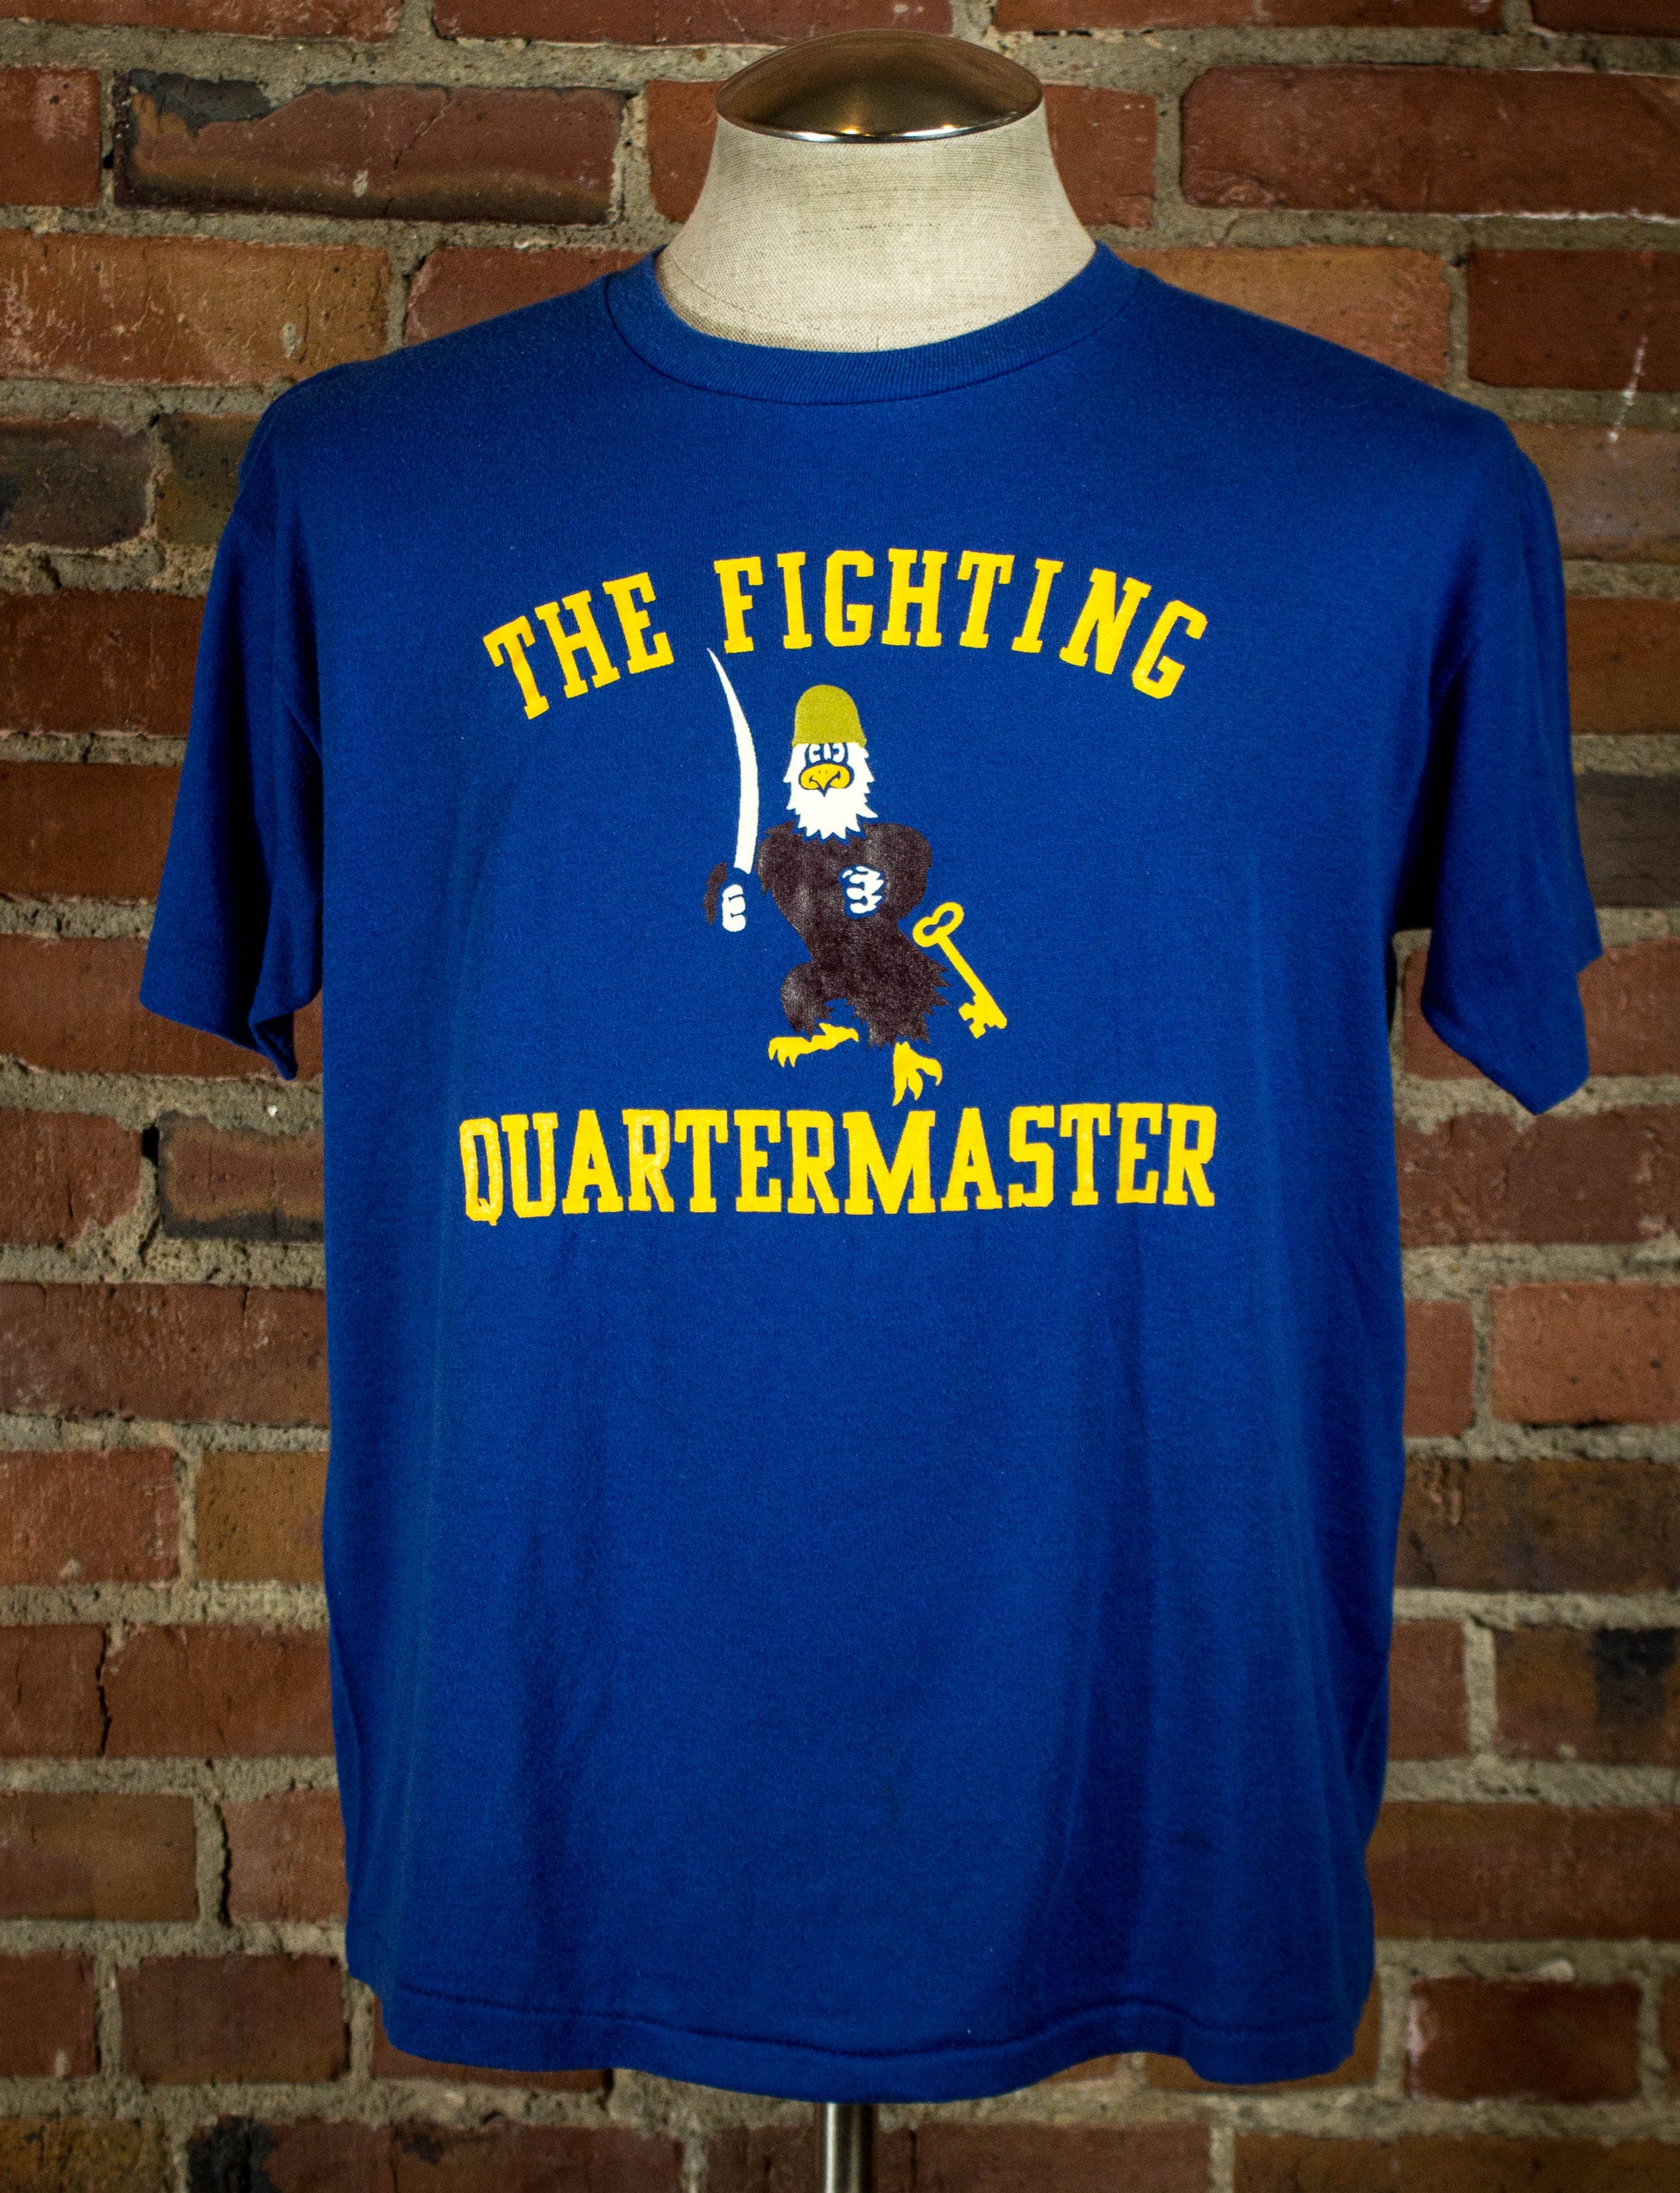 Vintage 80s The Fighting Quartermaster Military T Shirt LargeVintage 80s The Fighting Quartermaster Military T Shirt Large